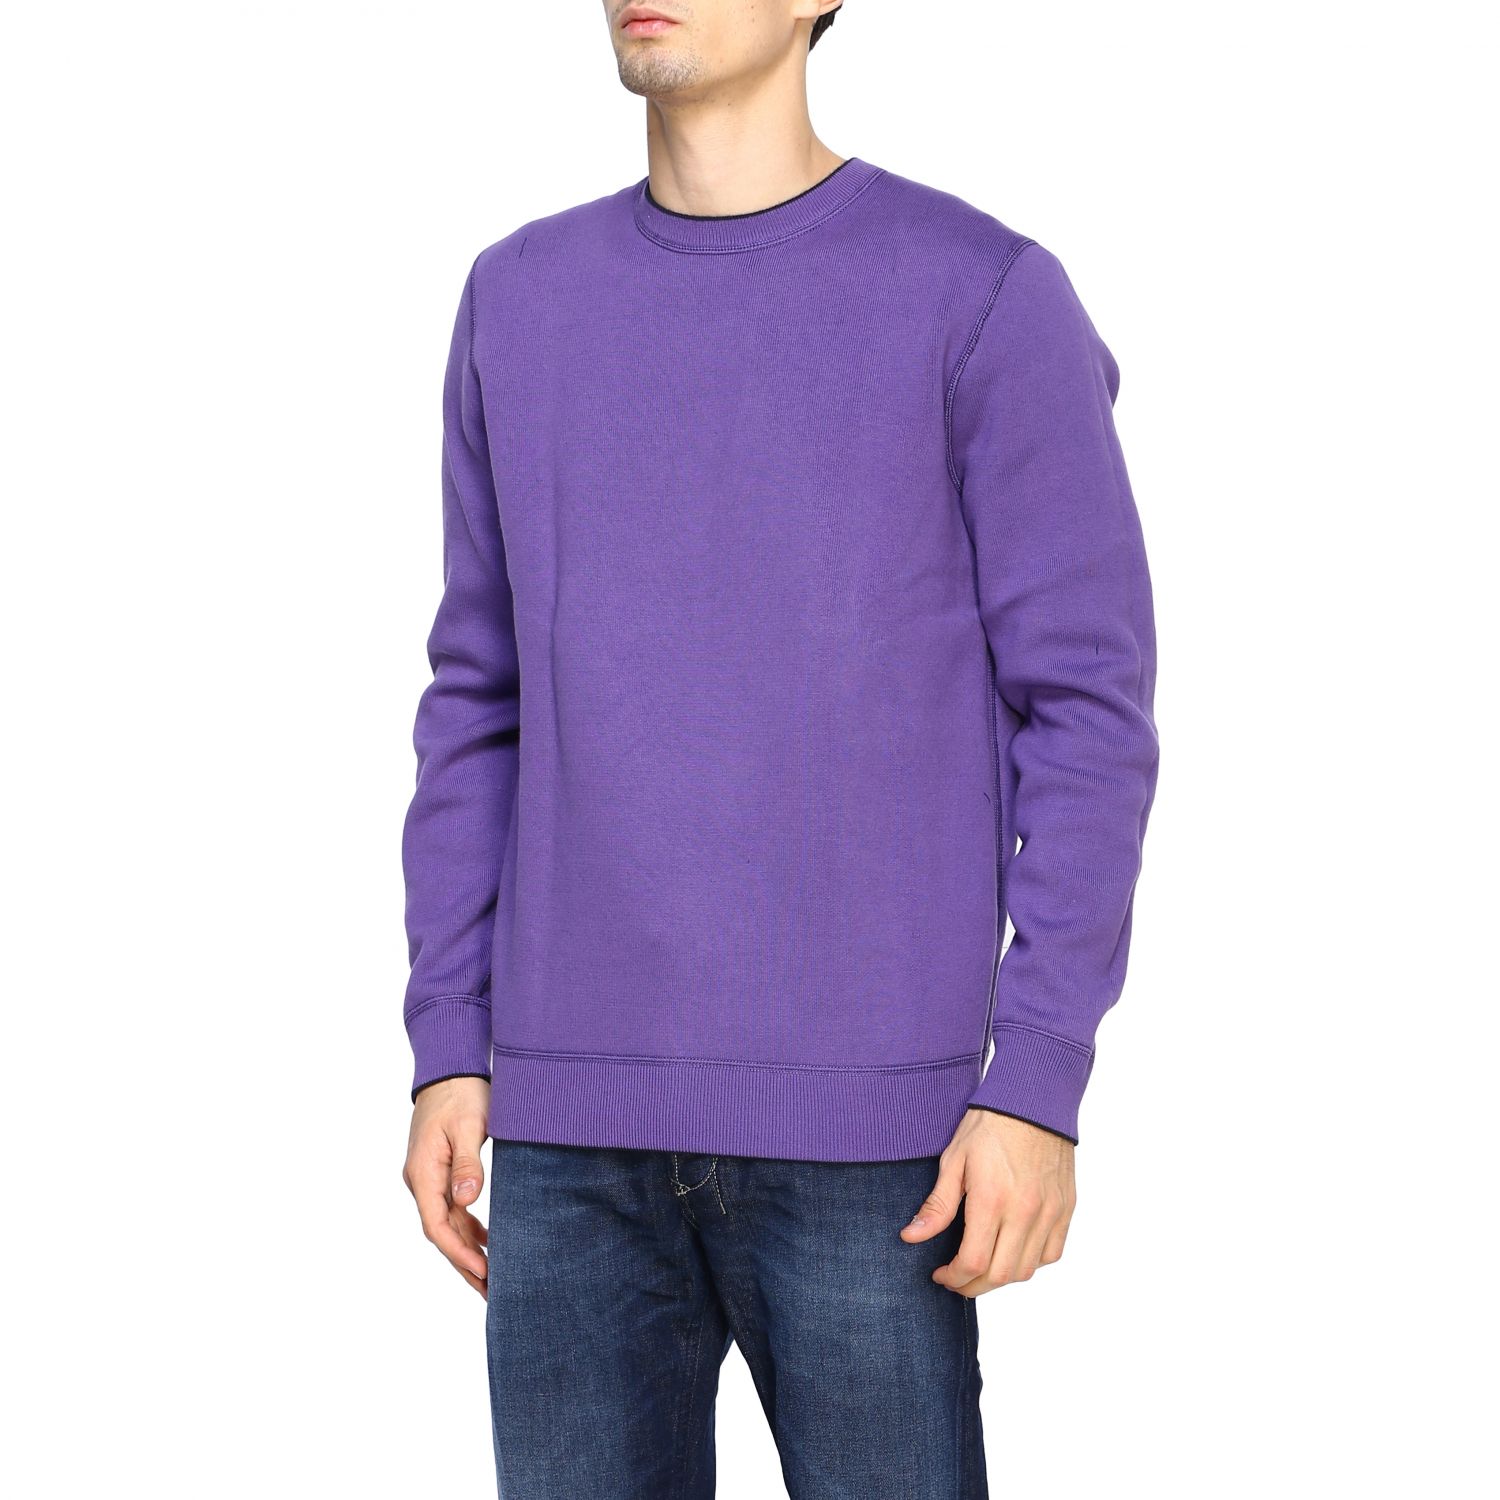 Lacoste Outlet: Sweater men | Sweater 